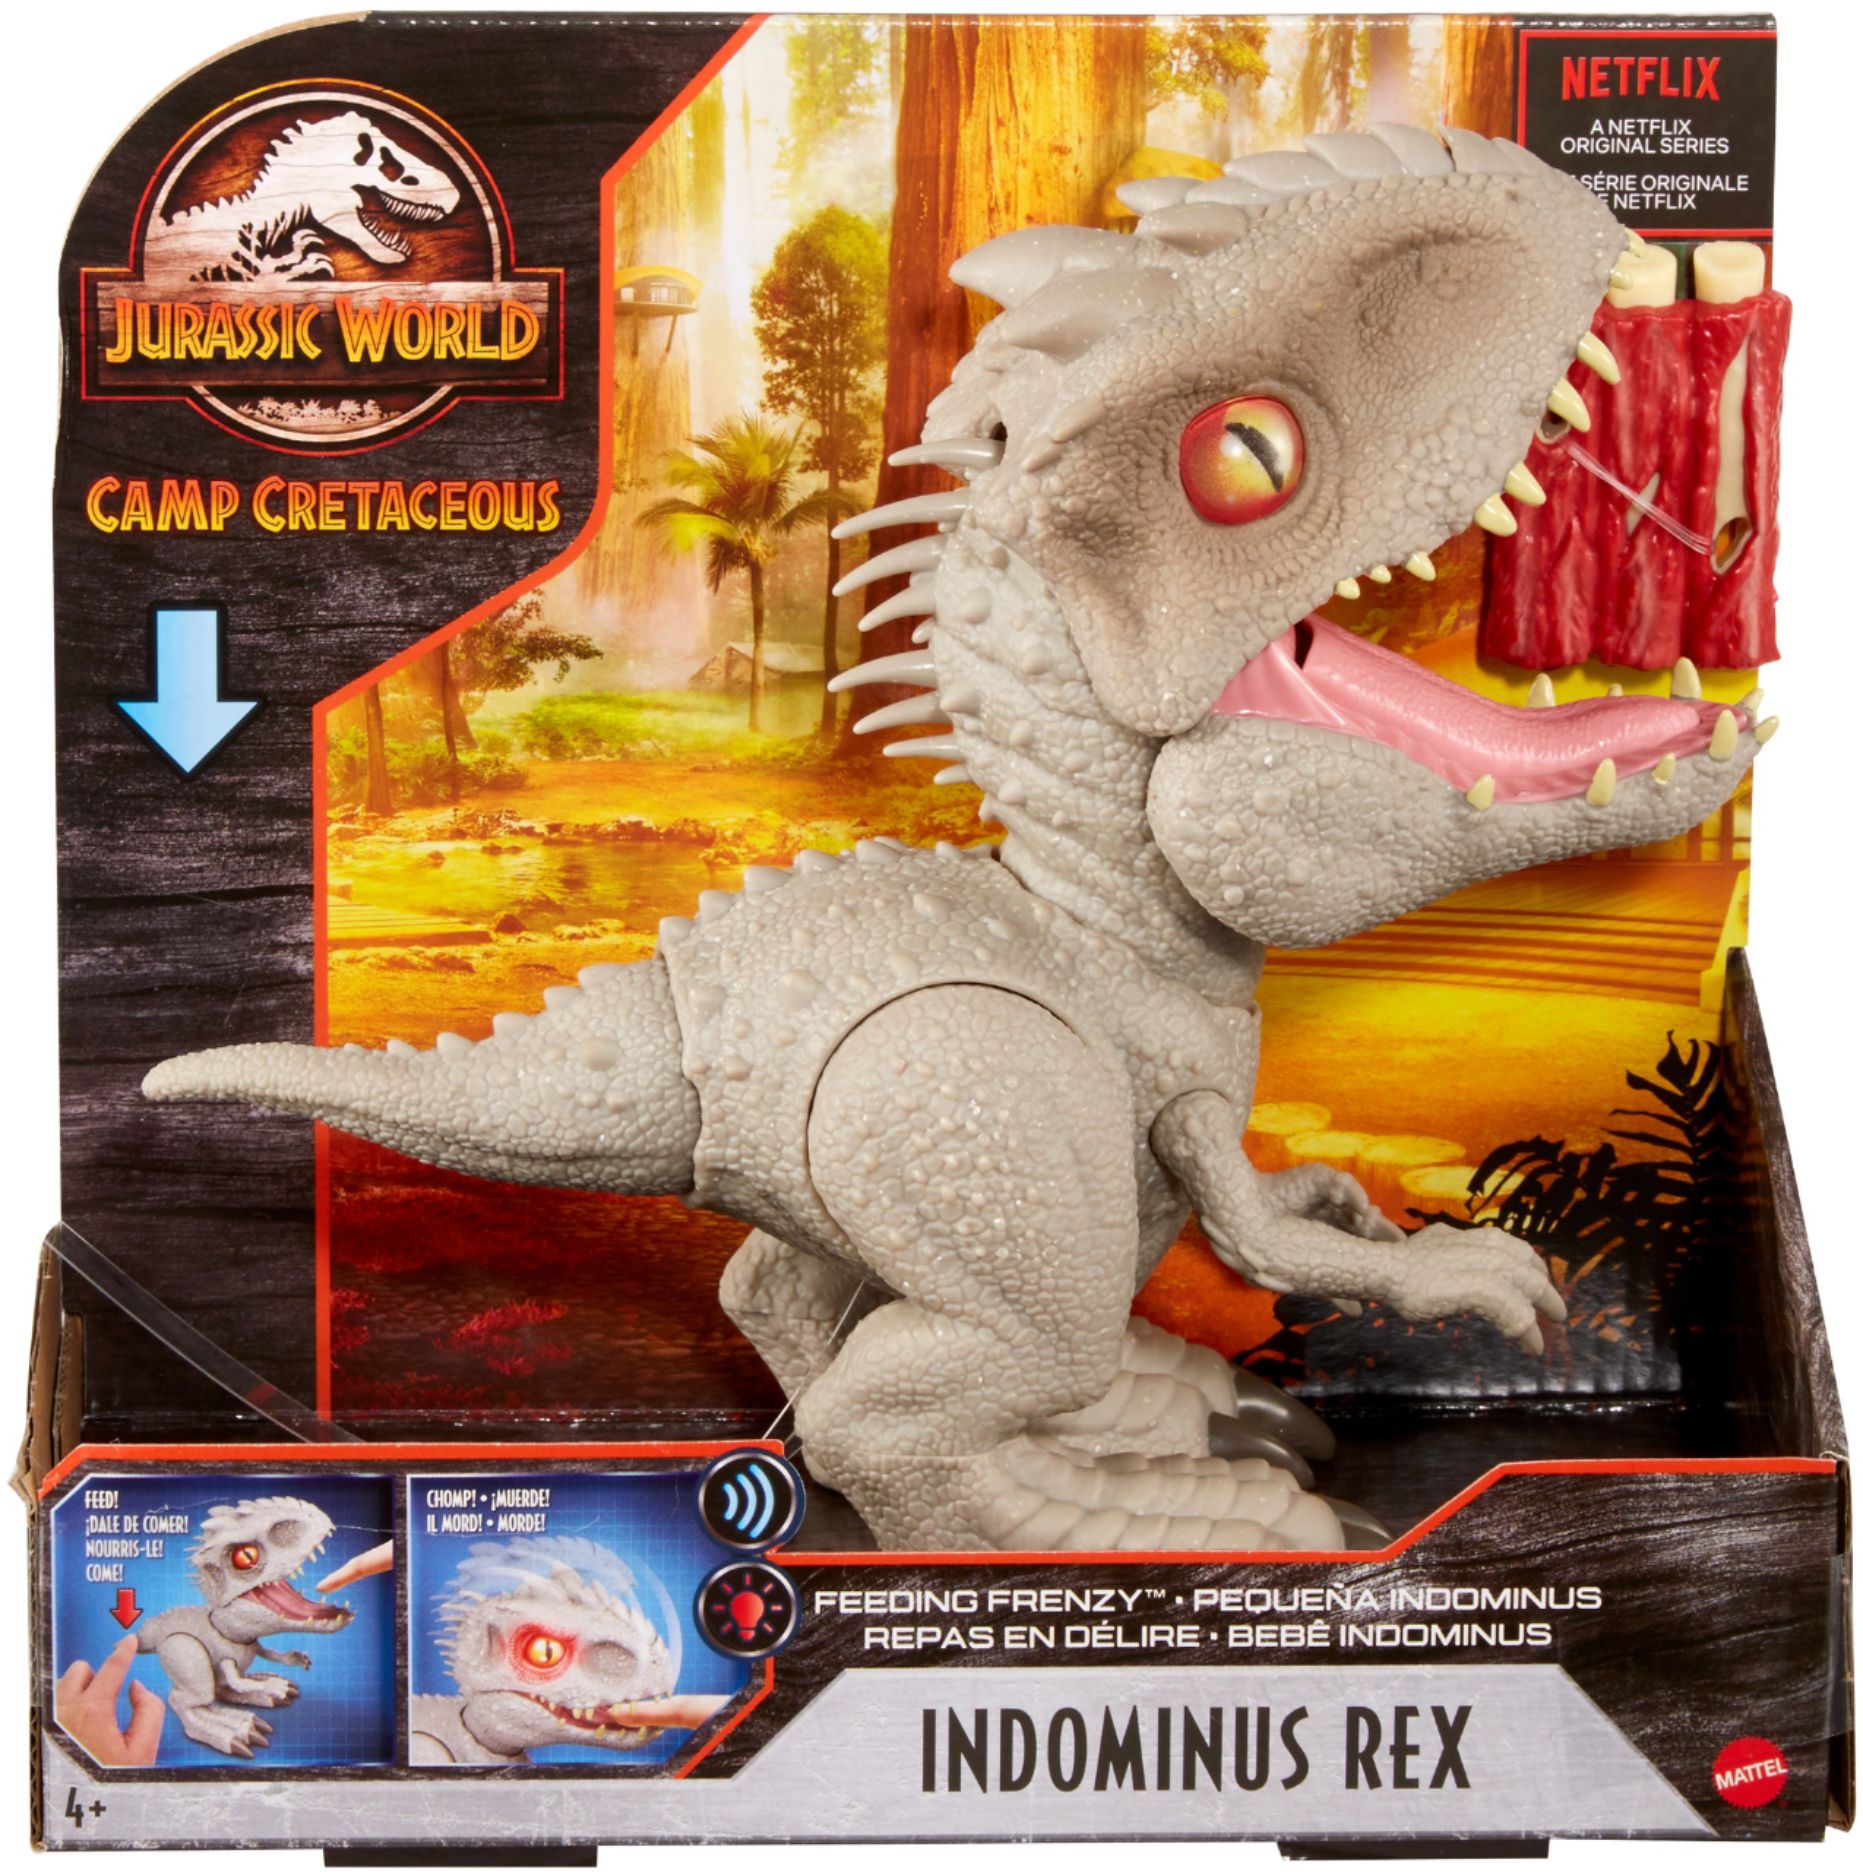 Left View: Jurassic World Camp Cretaceous Feeding Frenzy Indominus Rex with Lights and Sounds